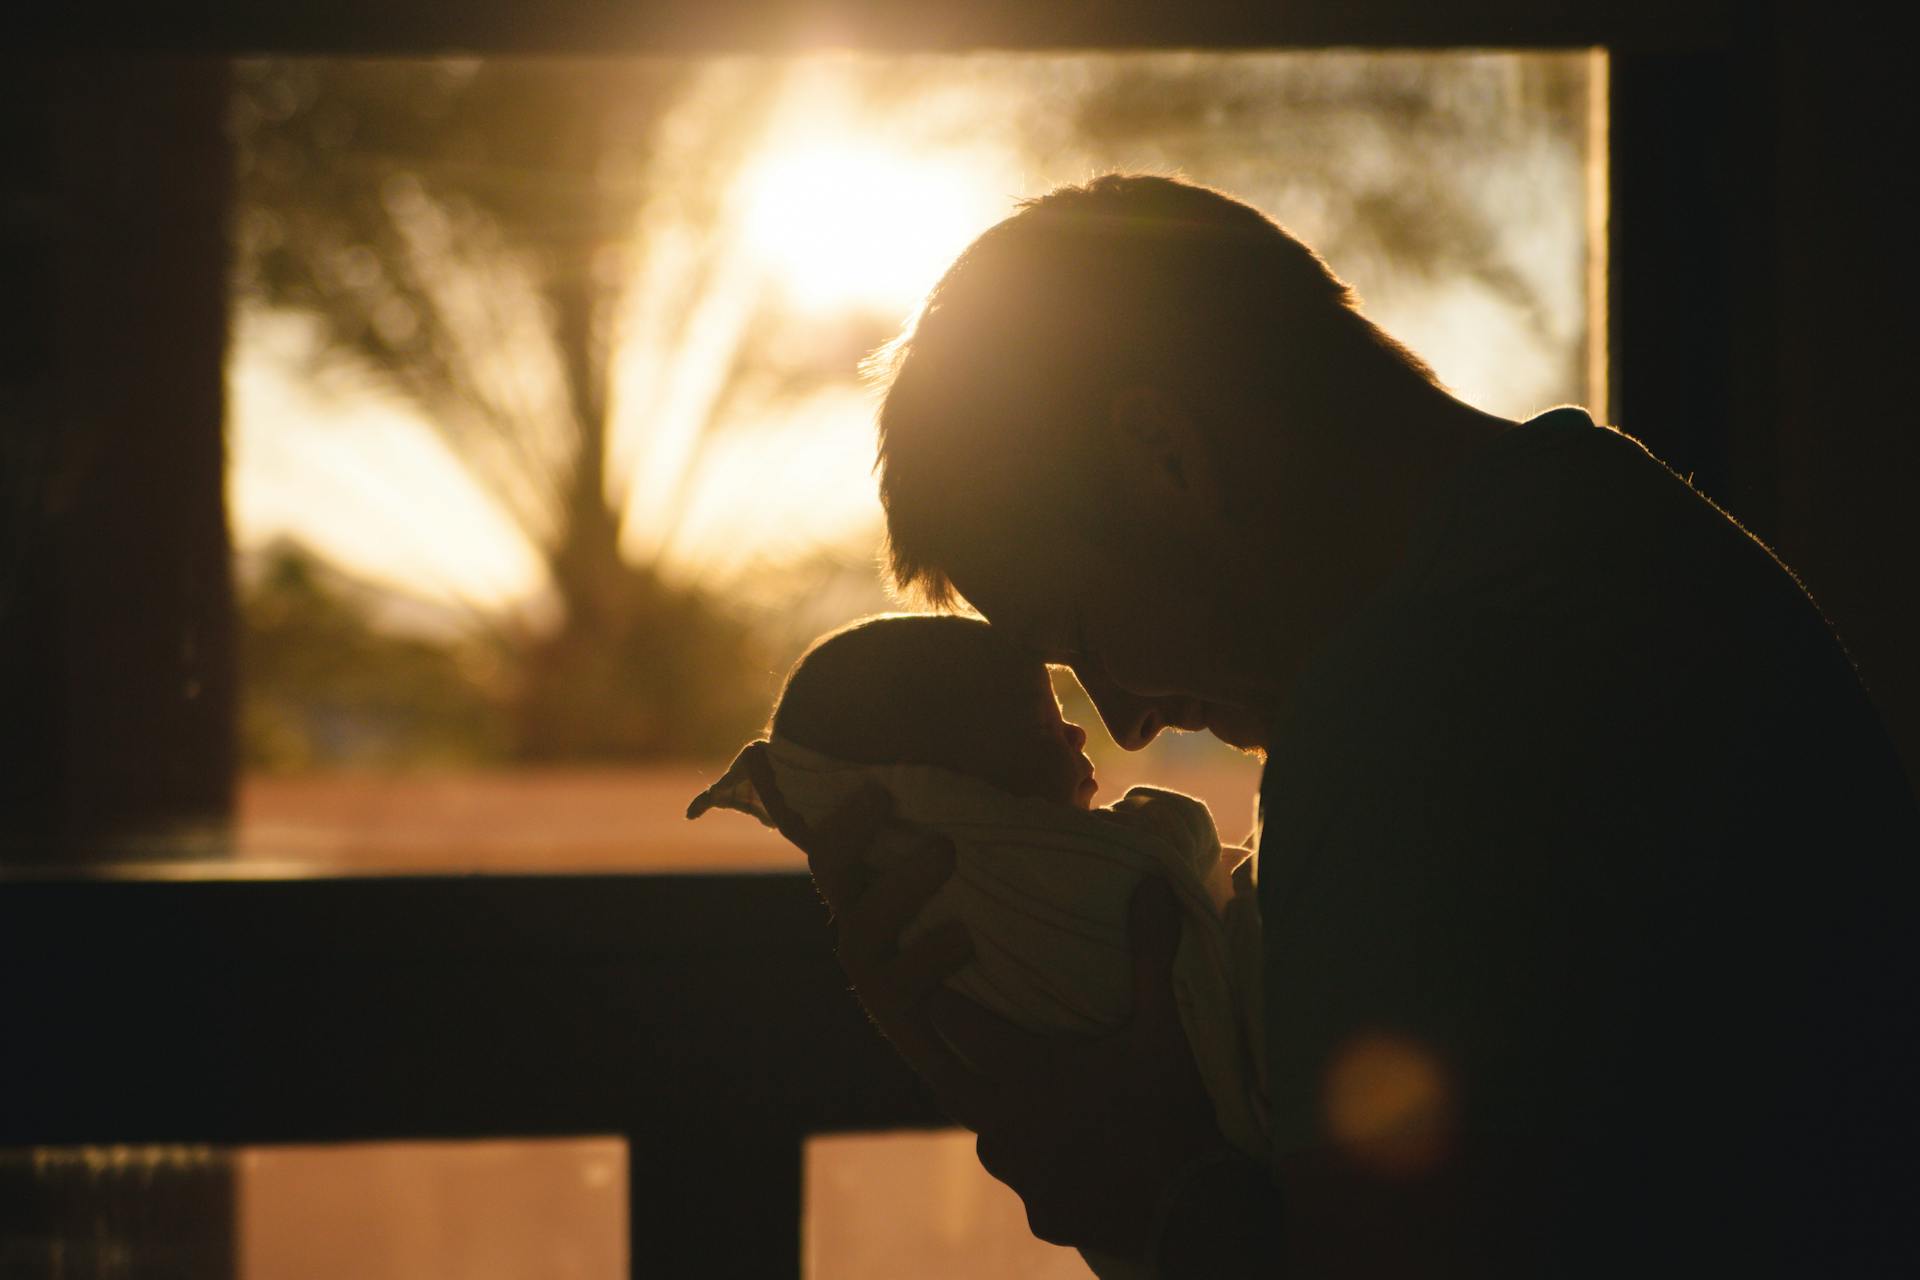 A father holding his newborn baby | Source: Pexels